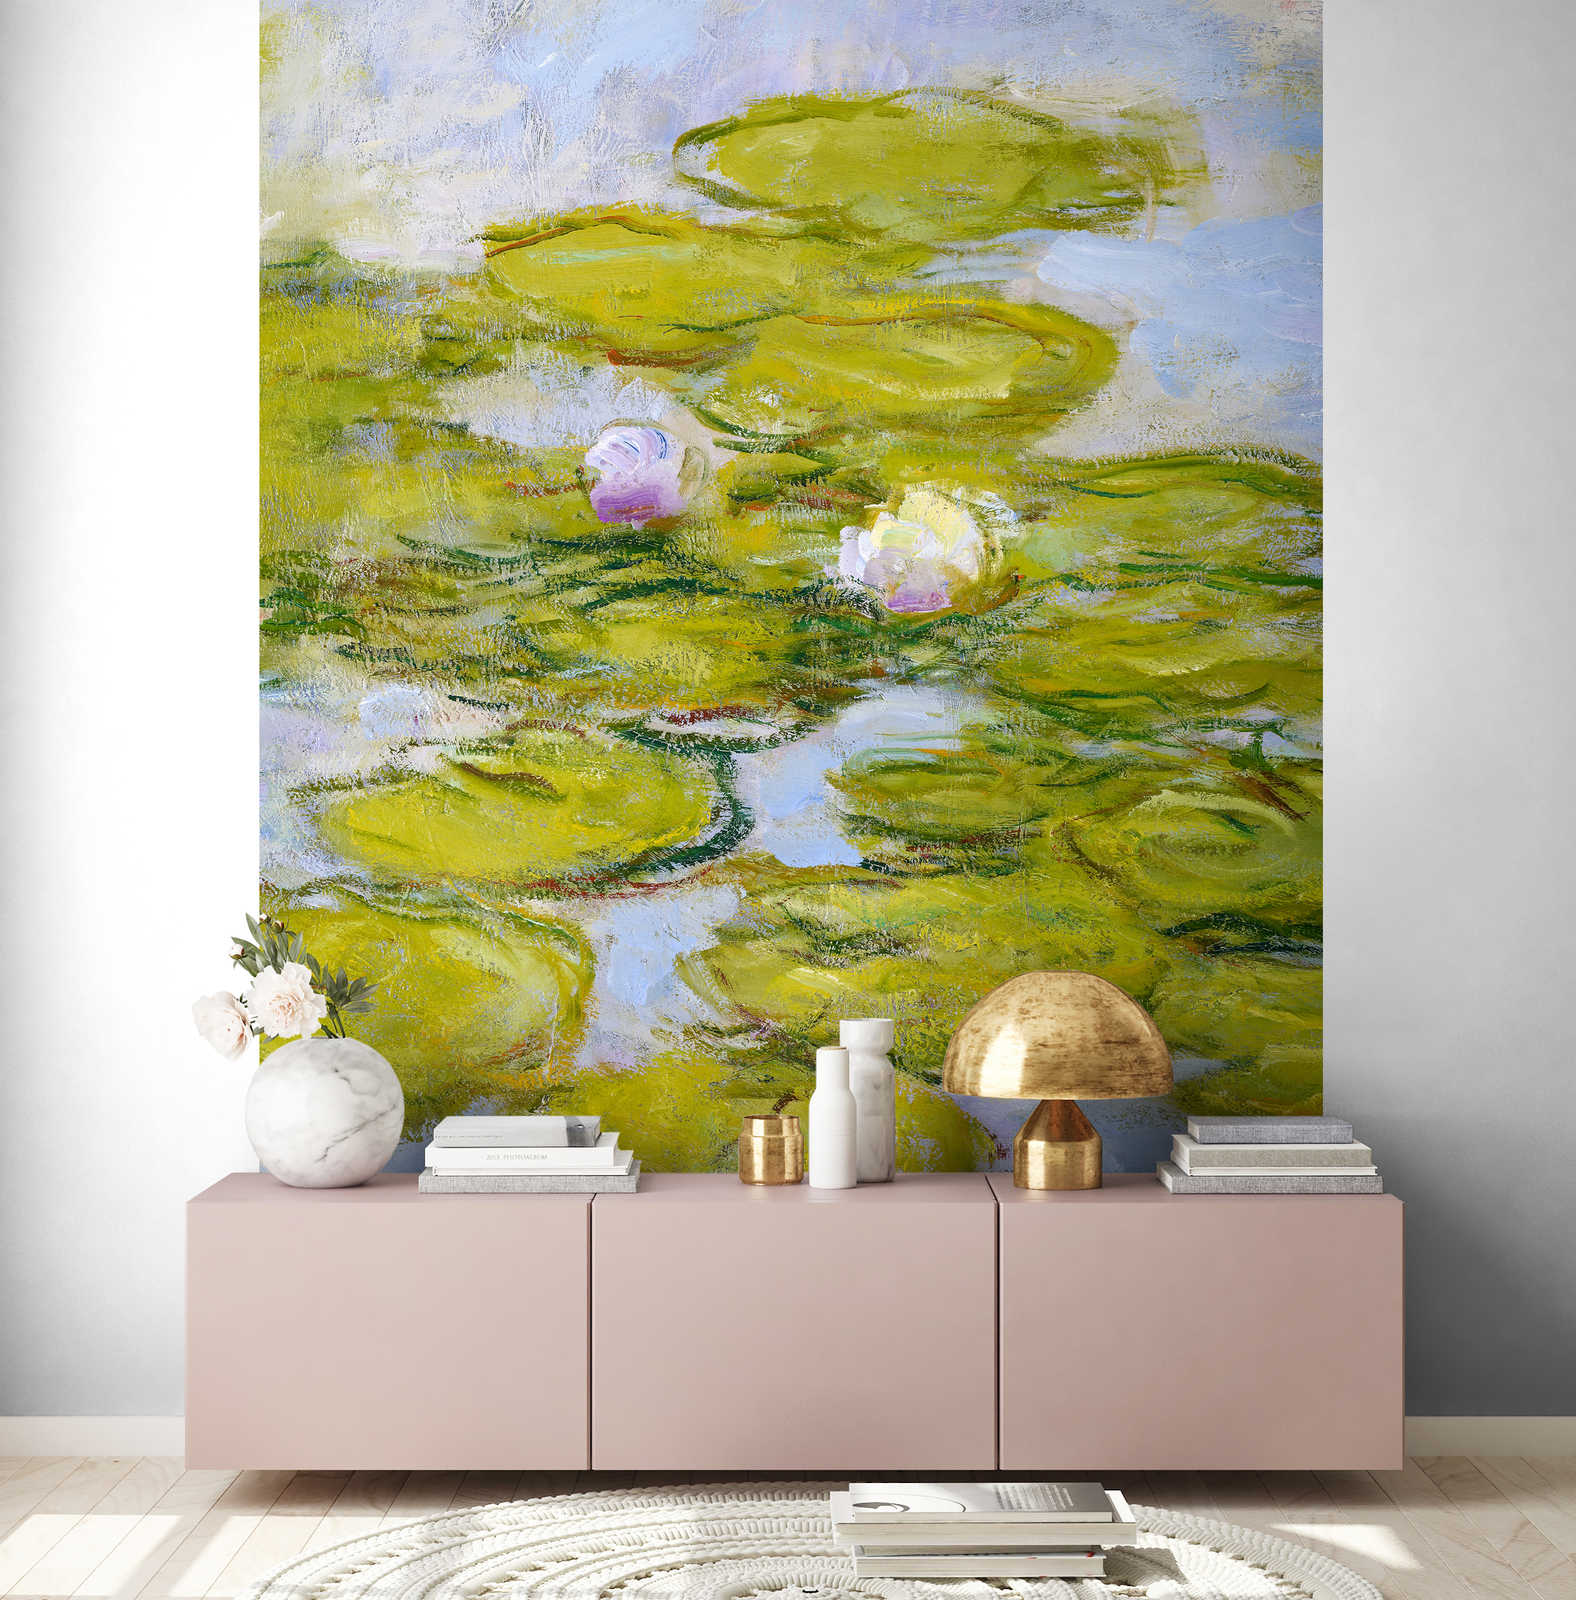             Photo wallpaper "Nymphs" by Claude Monet
        